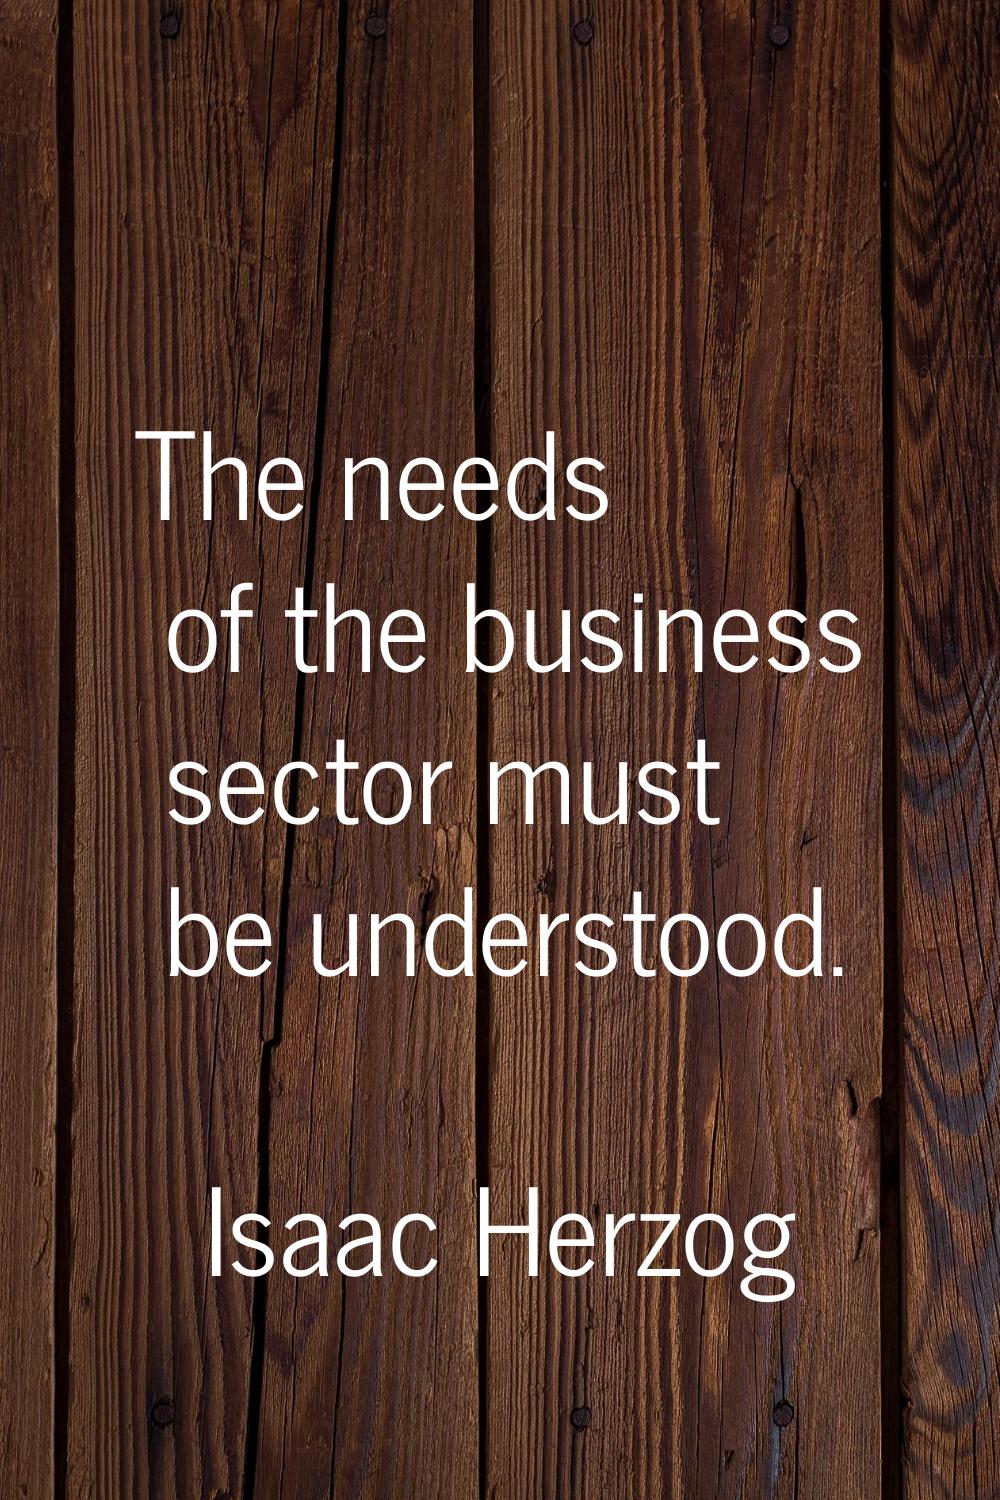 The needs of the business sector must be understood.